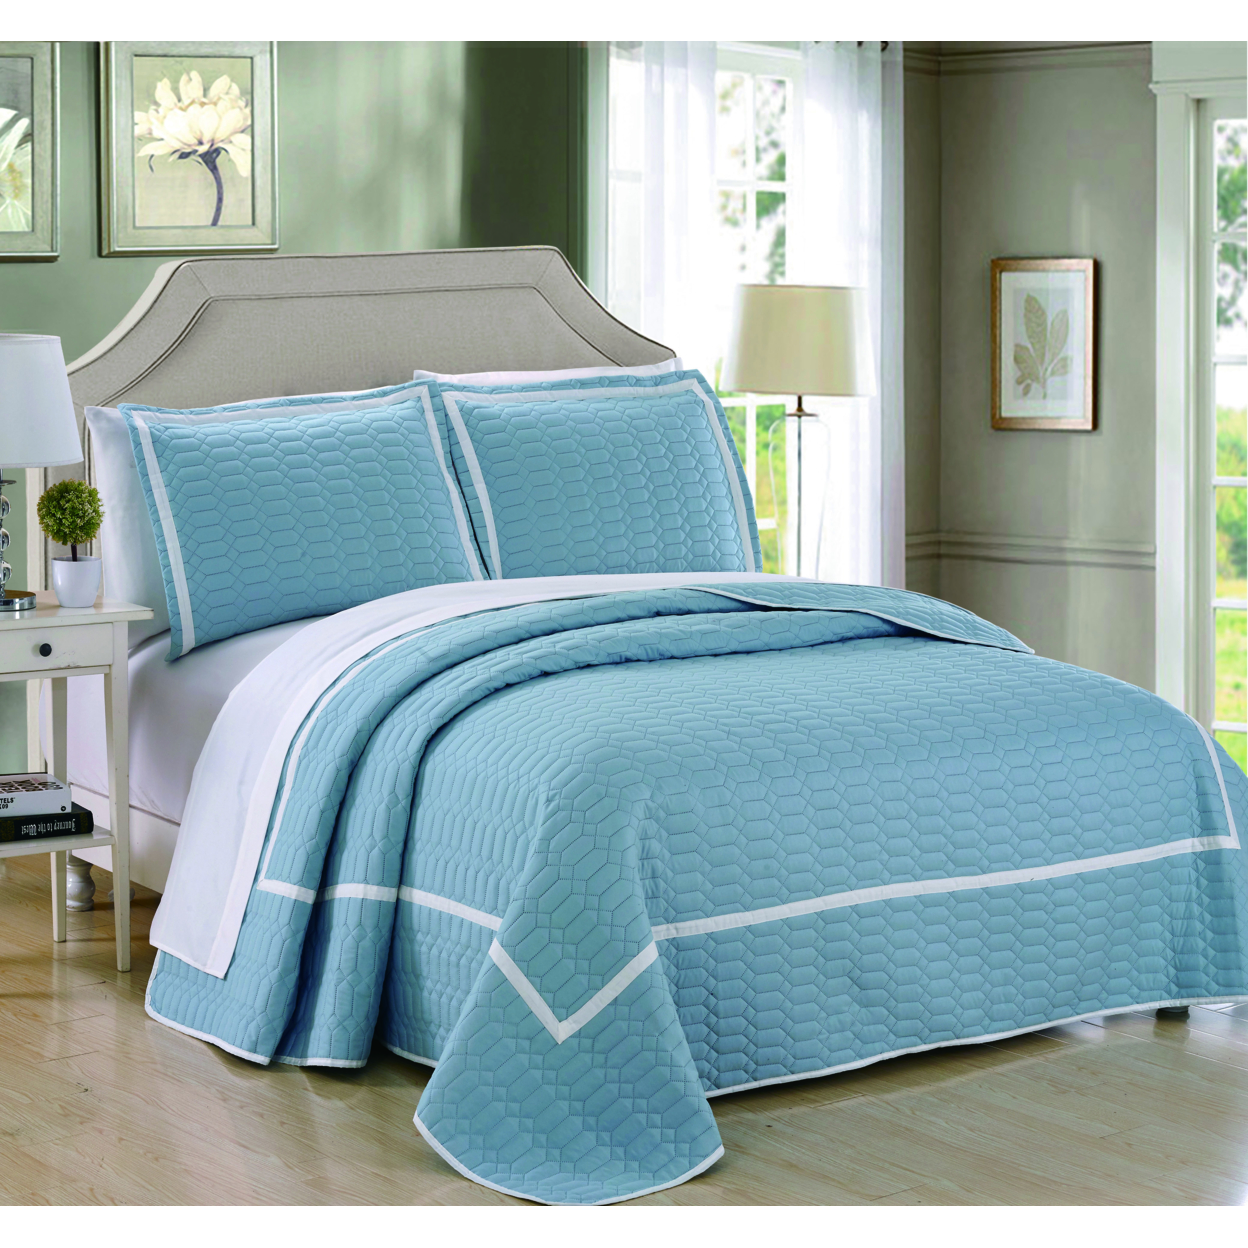 3 Or 2 Piece Halrowe Hotel Collection 2 Tone Banded Quilted Geometrical Embroidered Quilt Set - Grey, Queen